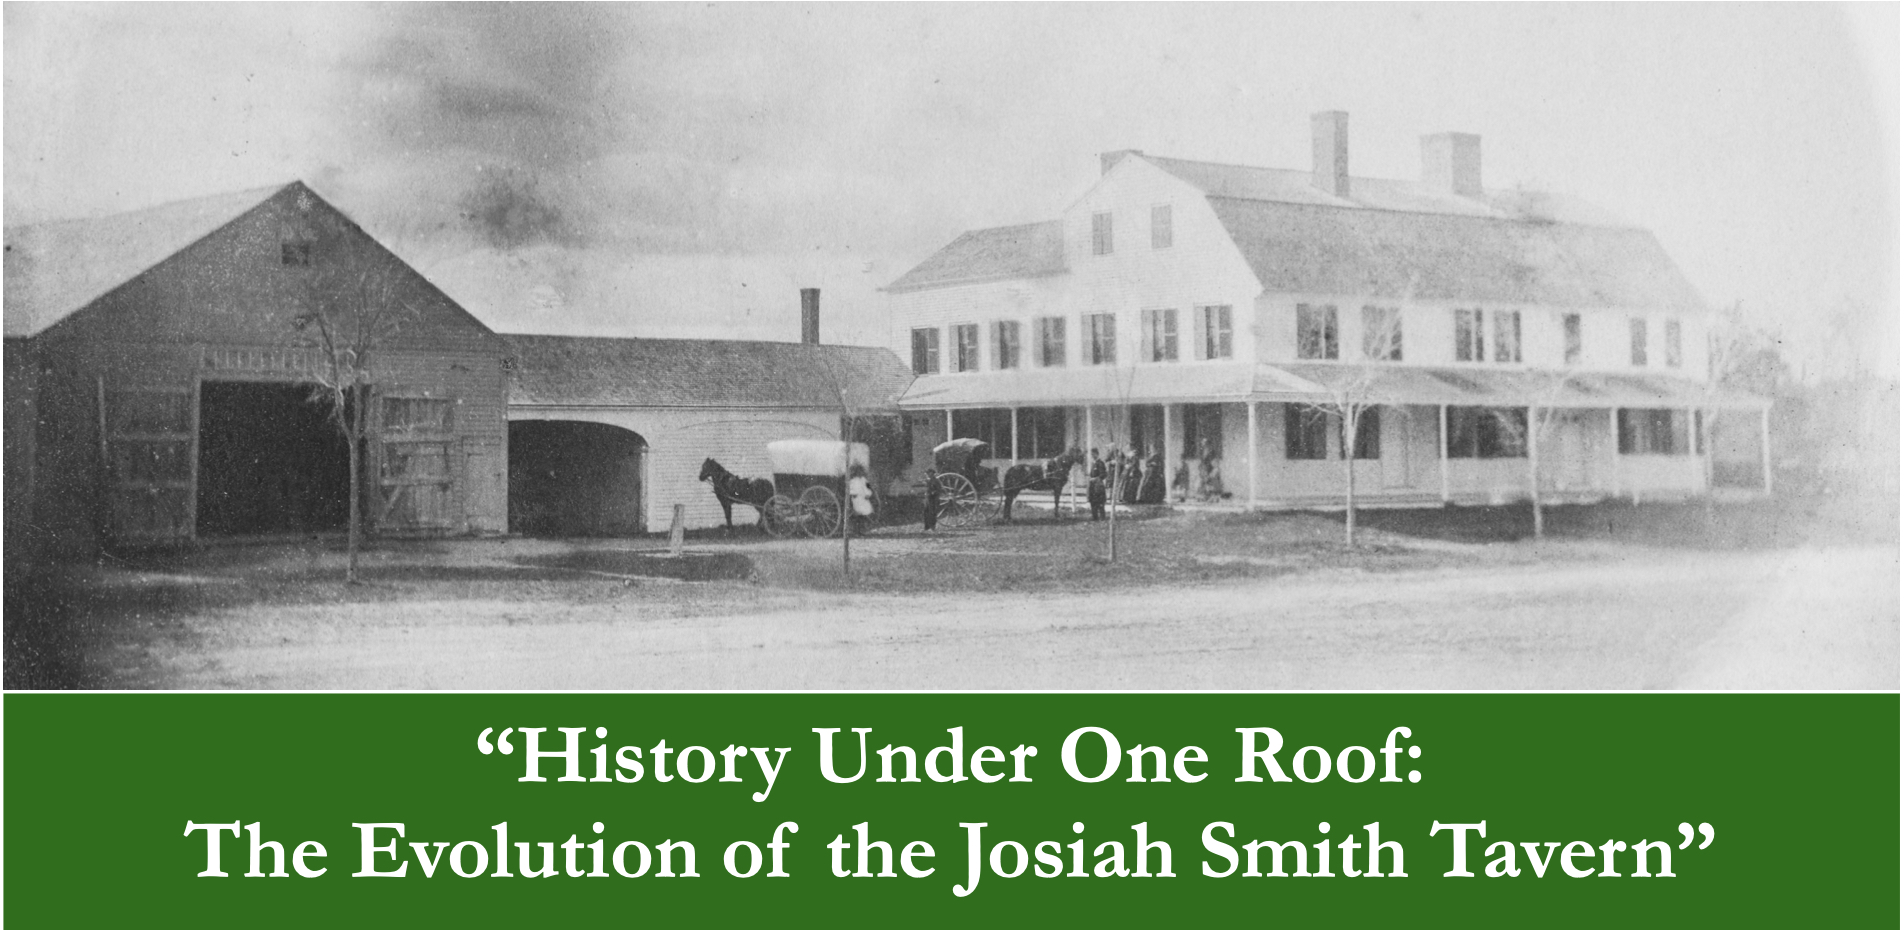 History Under One Roof: The Evolution of the Josiah Smith Tavern.